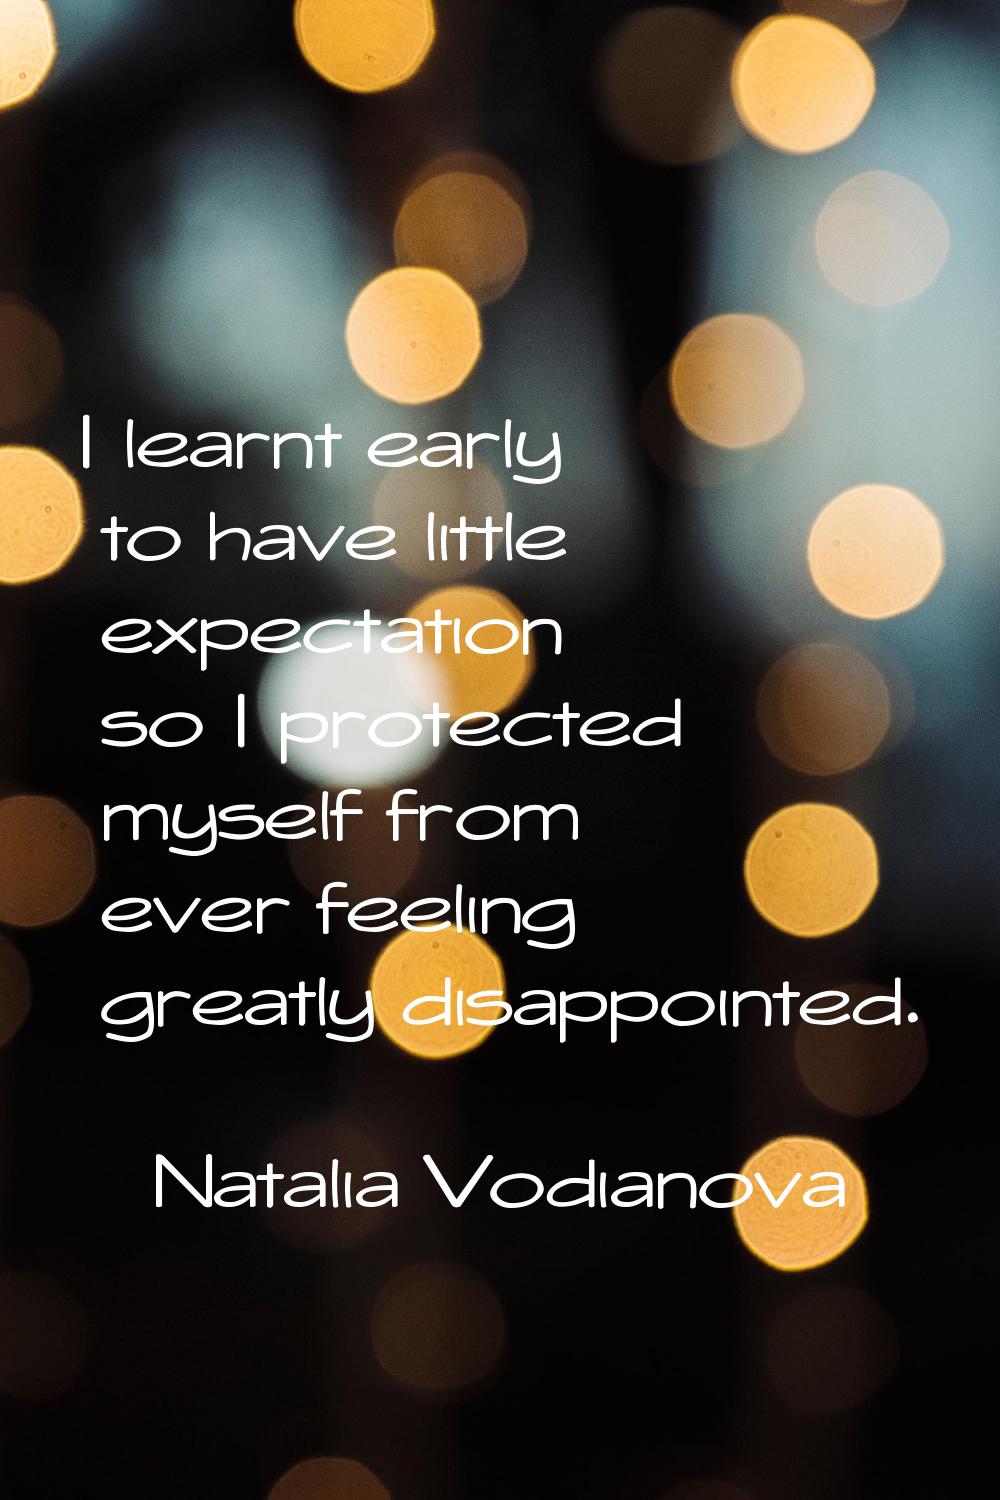 I learnt early to have little expectation so I protected myself from ever feeling greatly disappoin